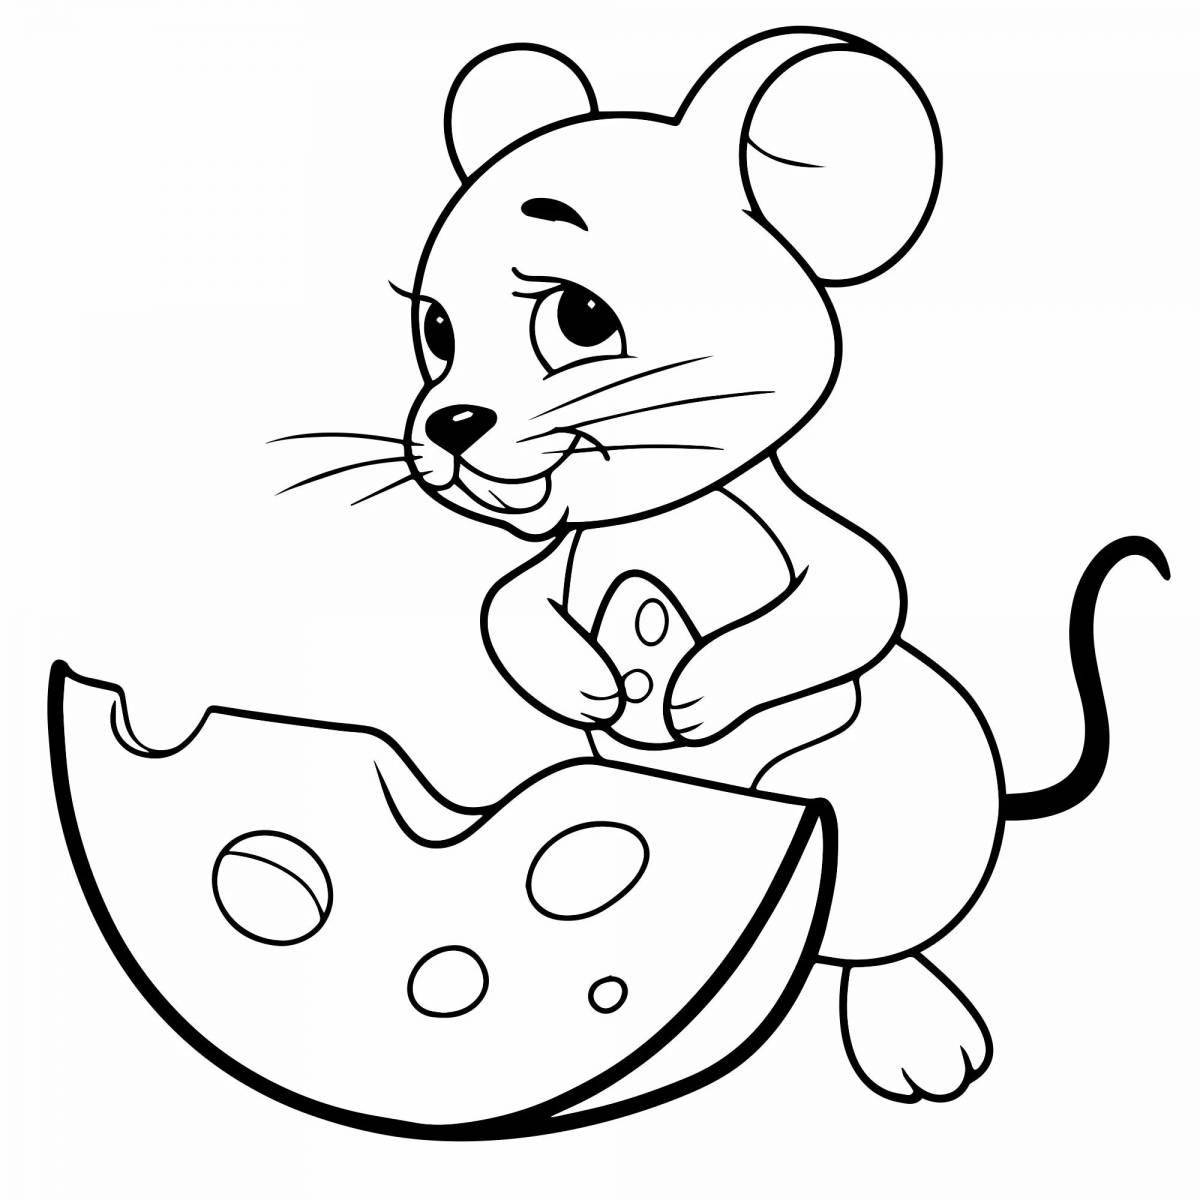 Joyful mouse coloring book for kids